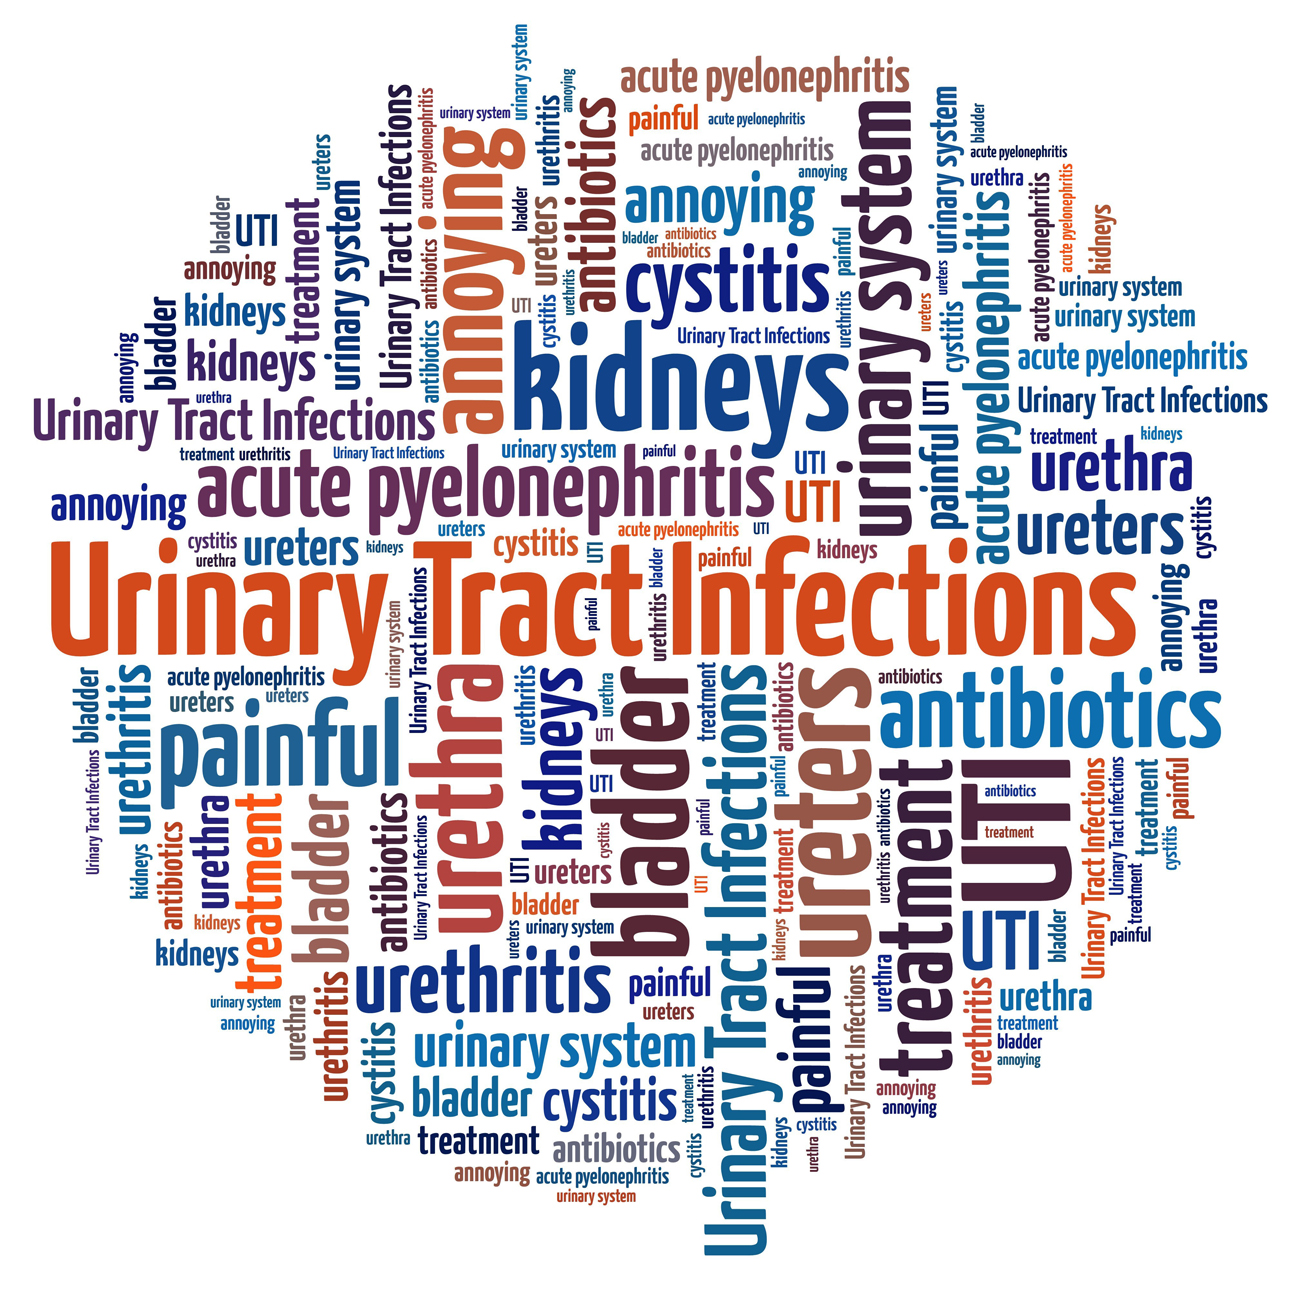 Graphic of several words placed in a cluster describing urinary and bladder conditions, symptoms, and treatments.